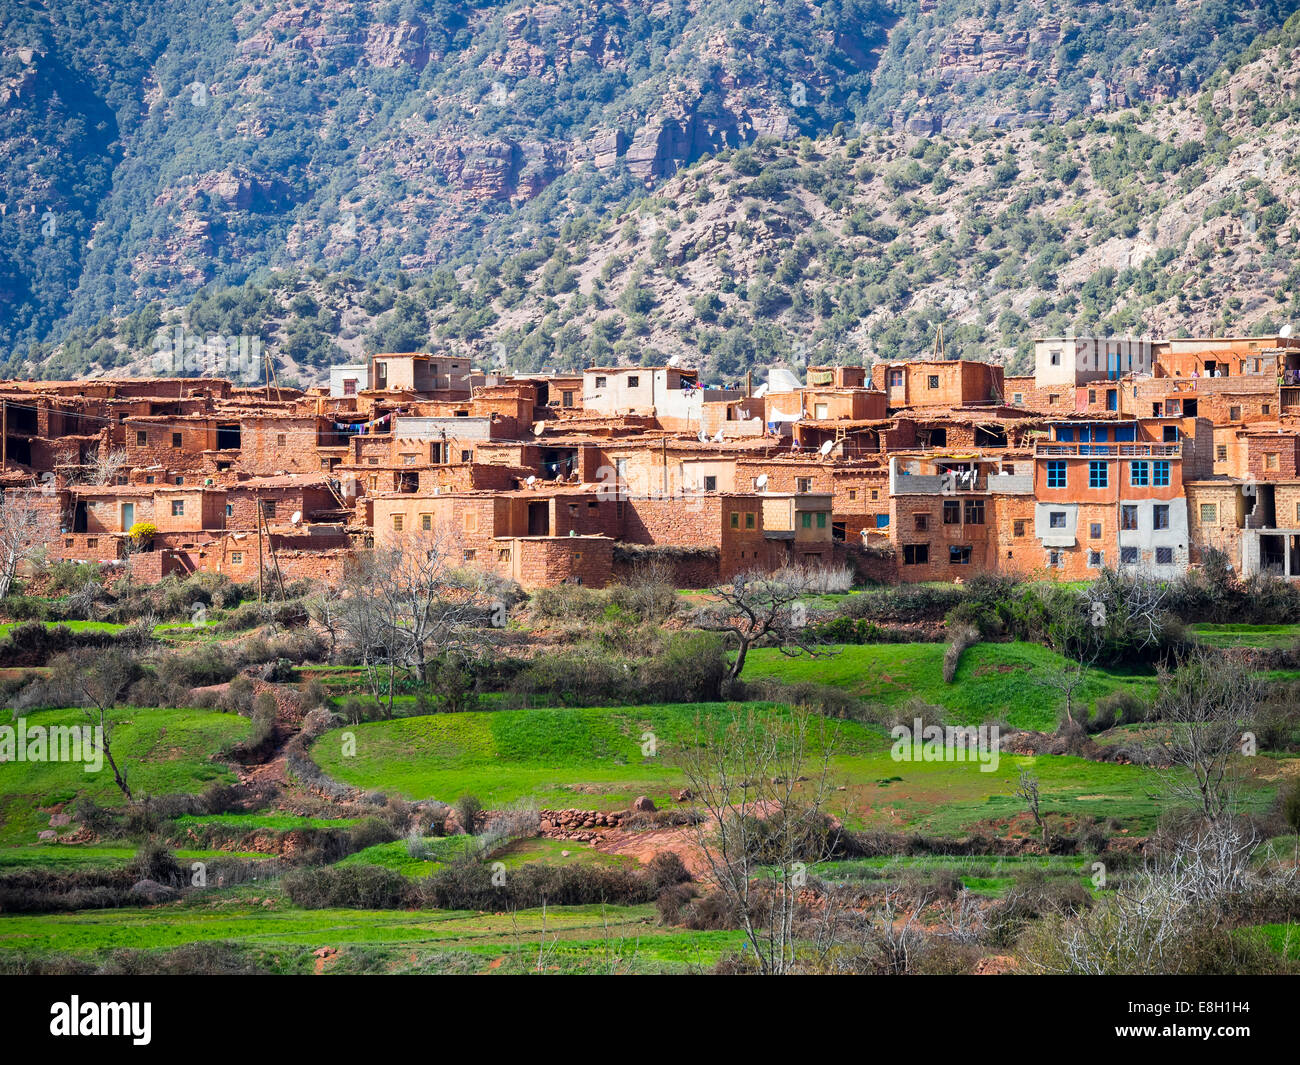 Morocco, Atlas Mountains, Ourika Valley, loam houses in village Anammer Stock Photo